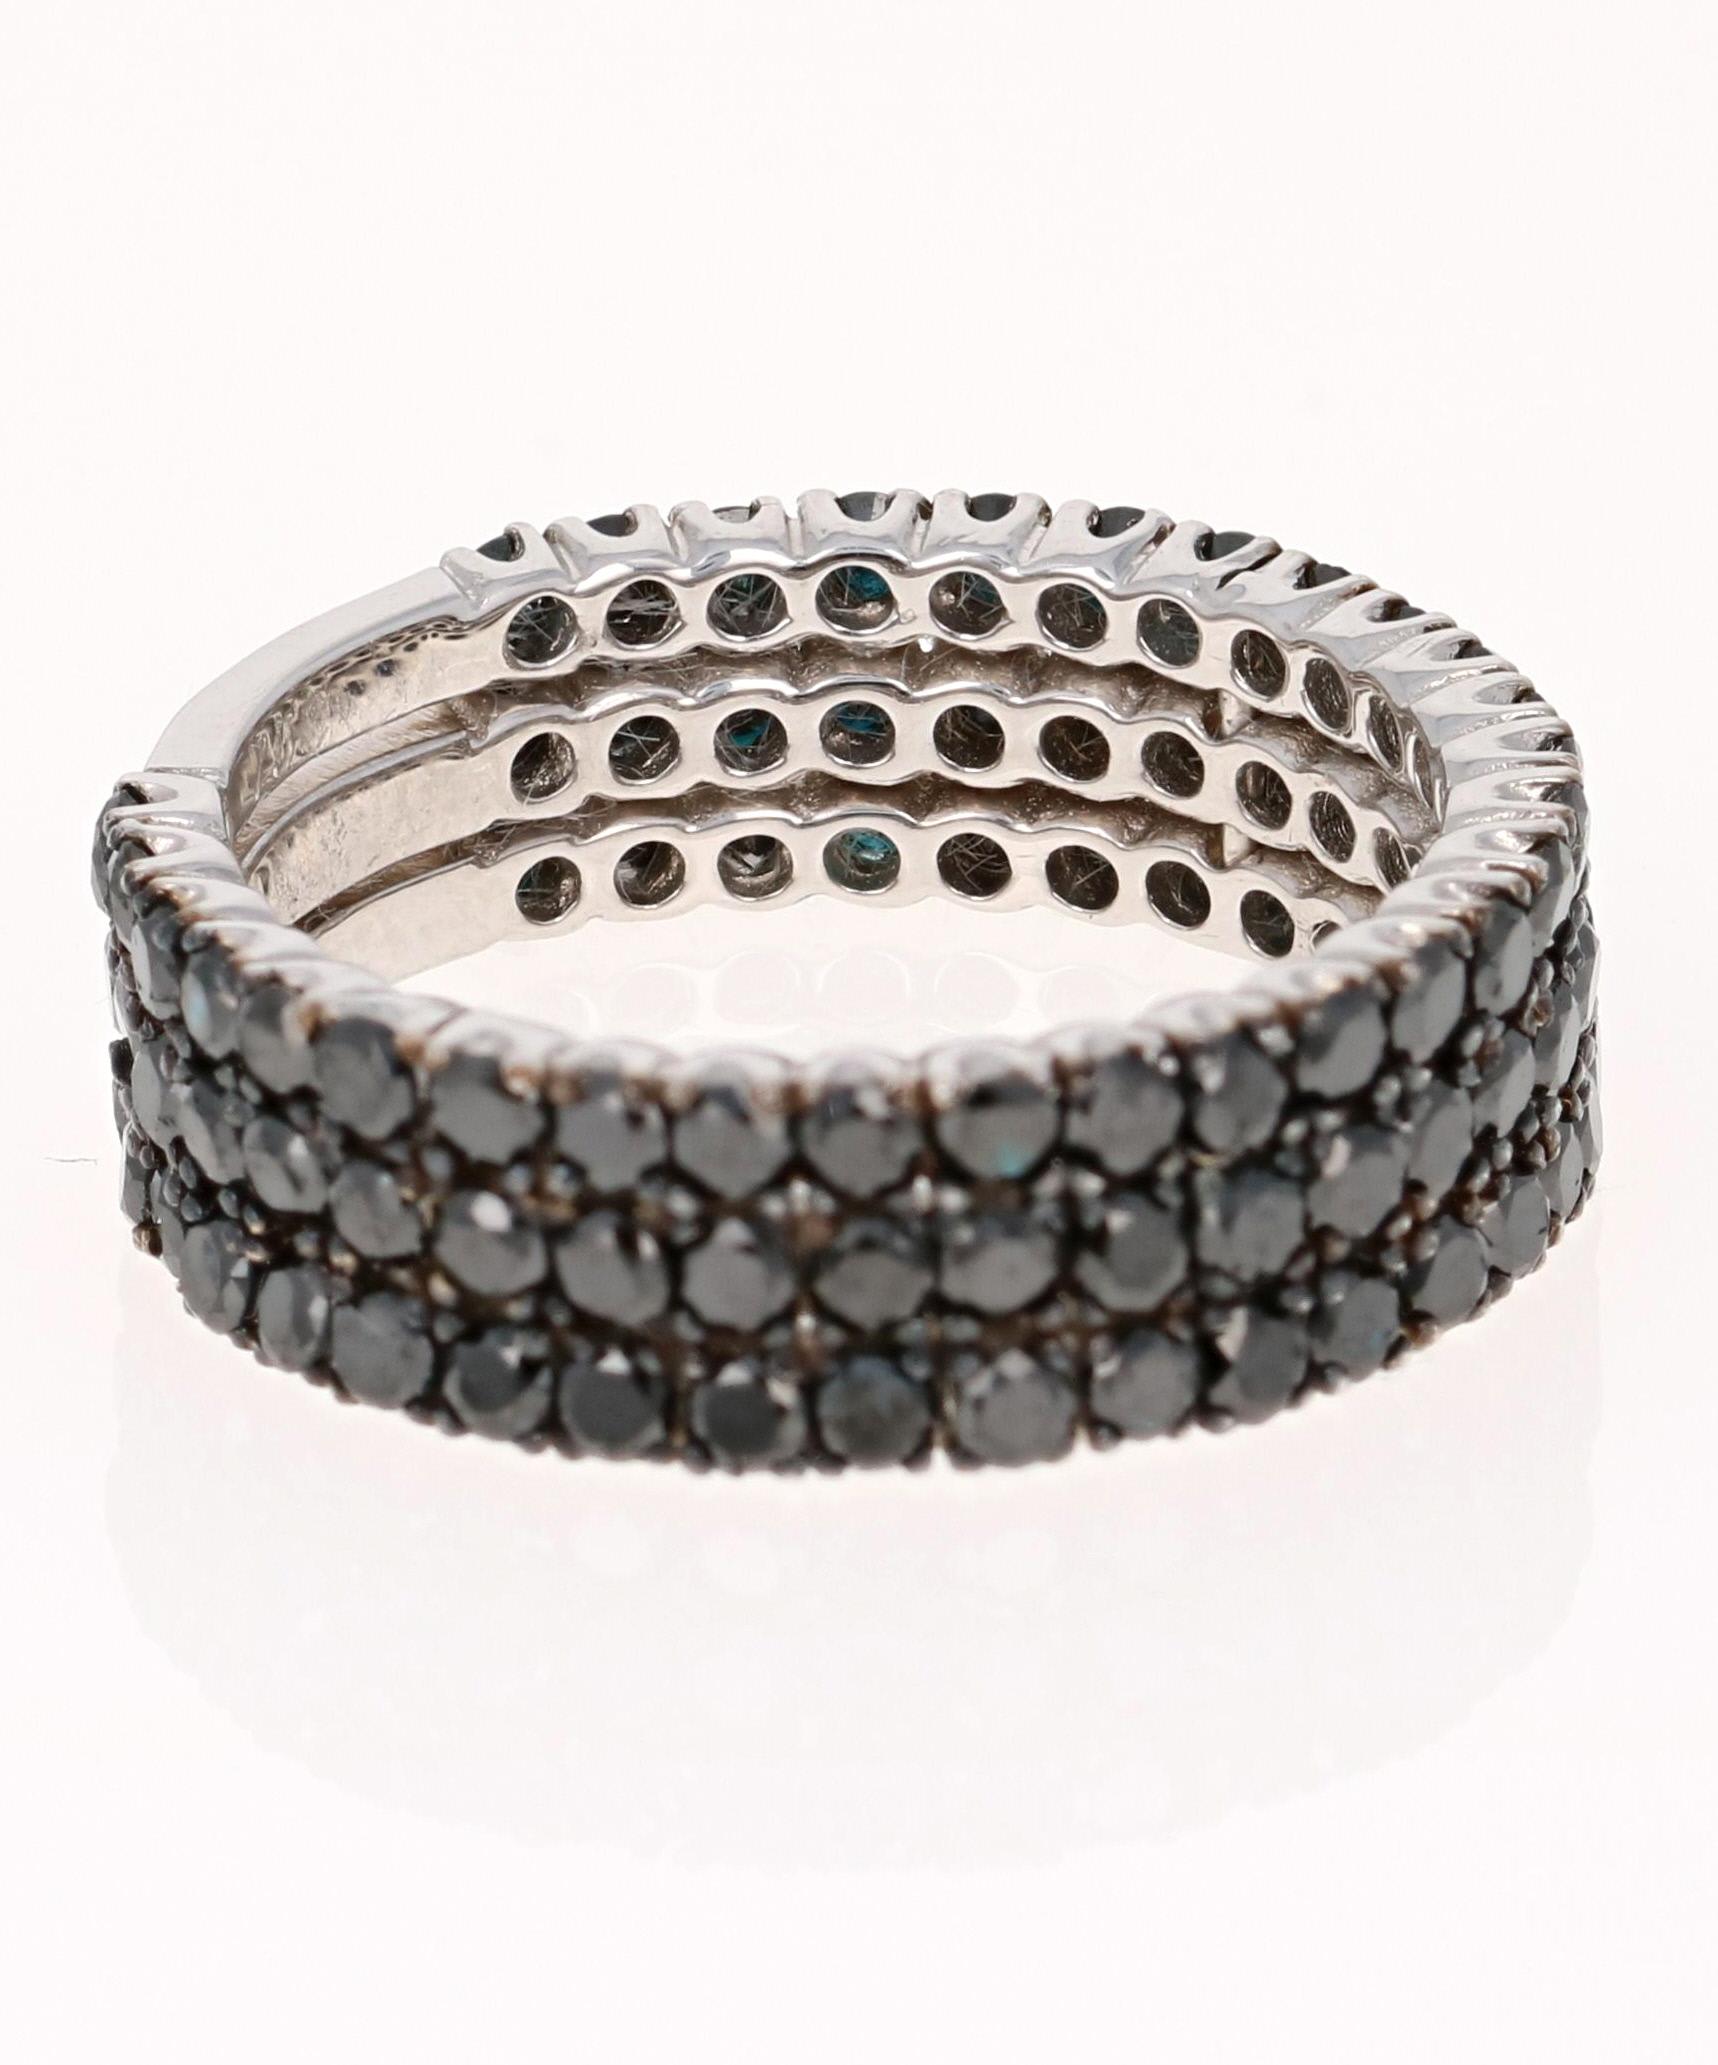 This band has Natural Round Cut Black Diamonds that weigh 2.15 Carats. It is crafted in 14 Karat White Gold and weighs approximately 4.0 grams. 

The ring is a size 6 1/2 and can be re-sized, upon request, free of charge. 
